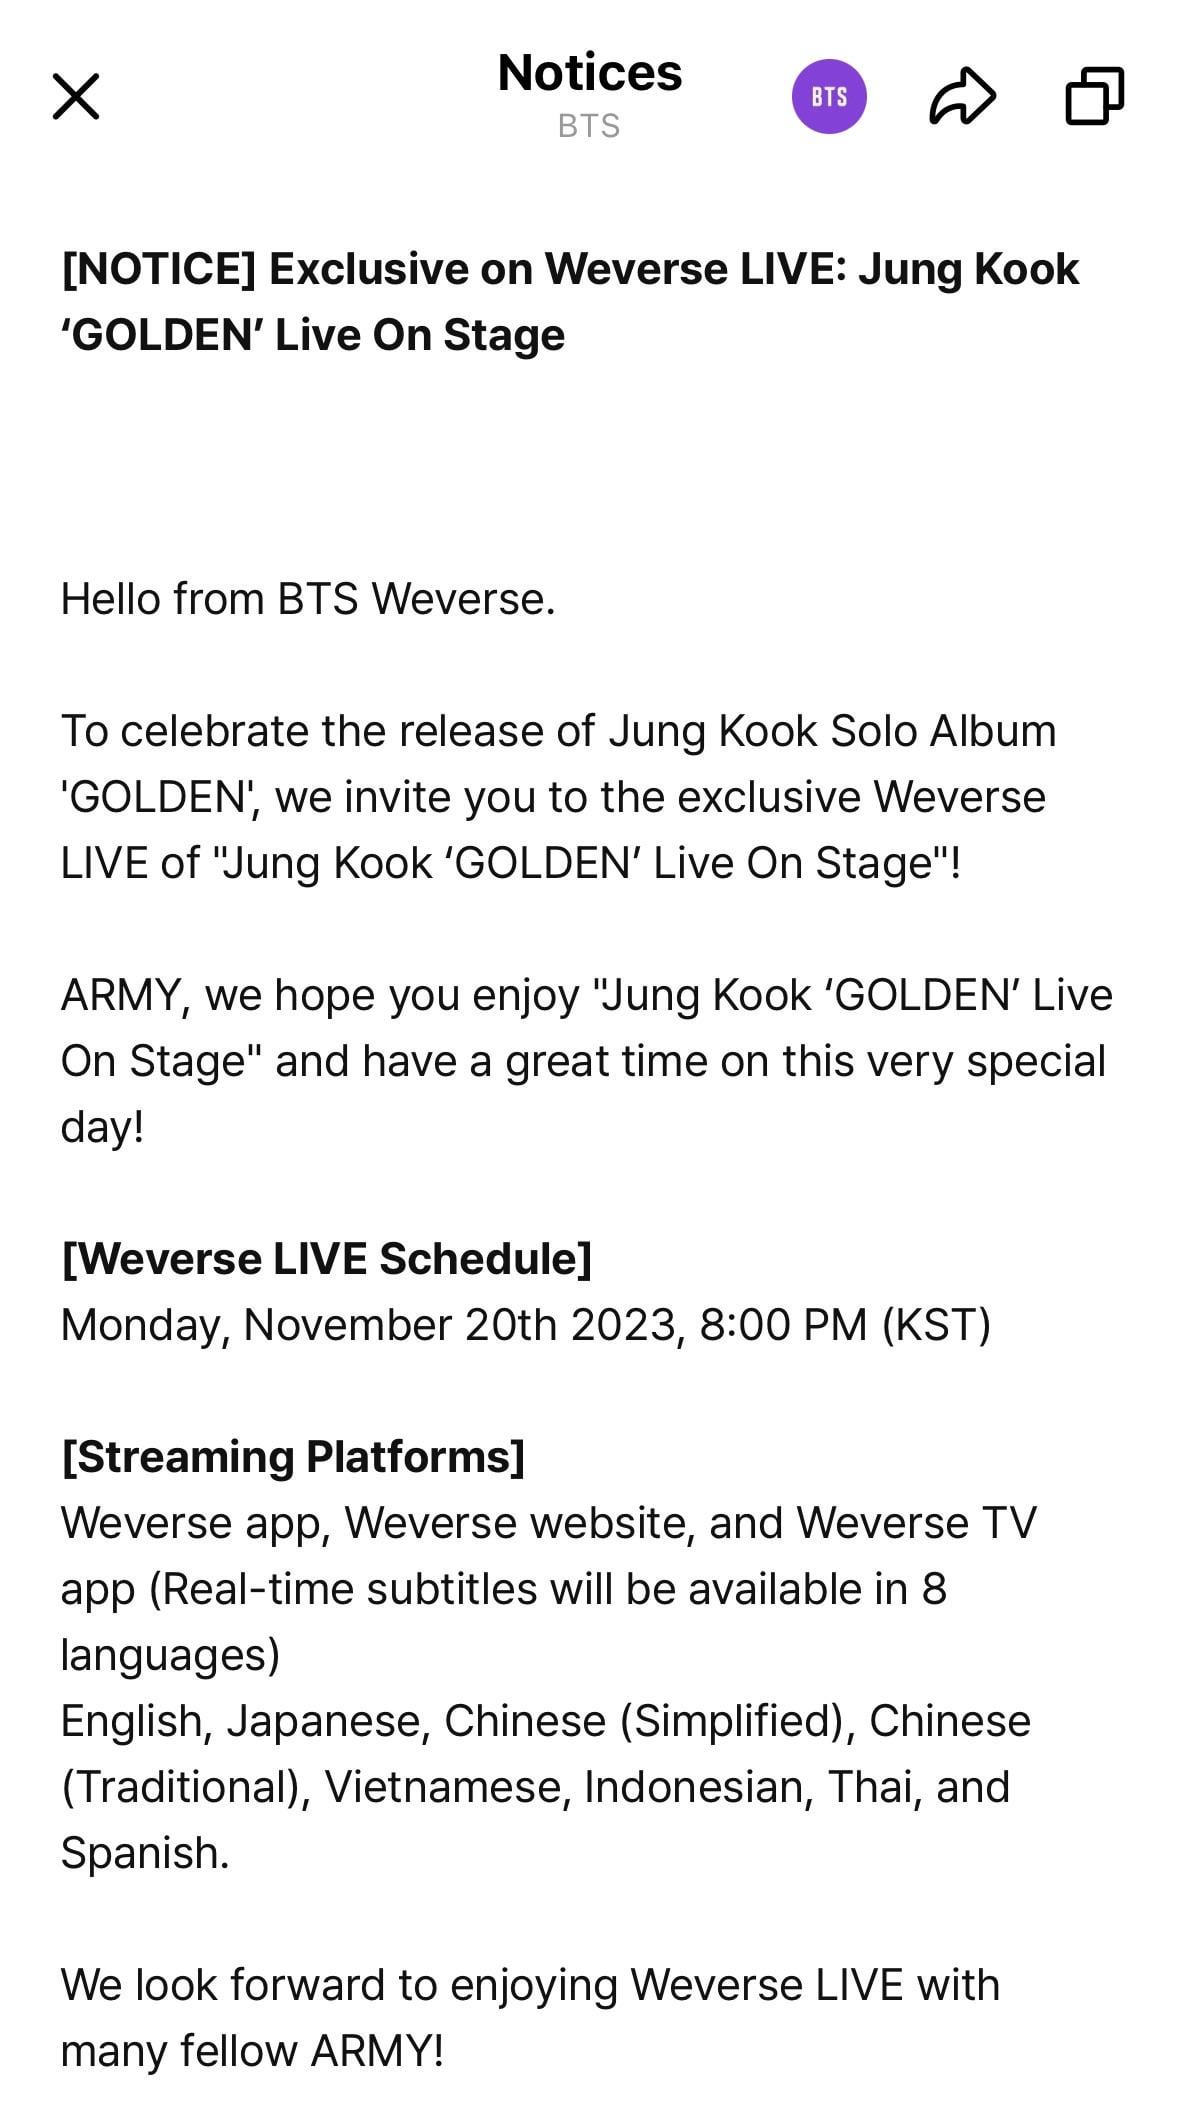 [NOTICE] Exclusive on Weverse LIVE: Jung Kook ‘GOLDEN’ Live On Stage - 121023